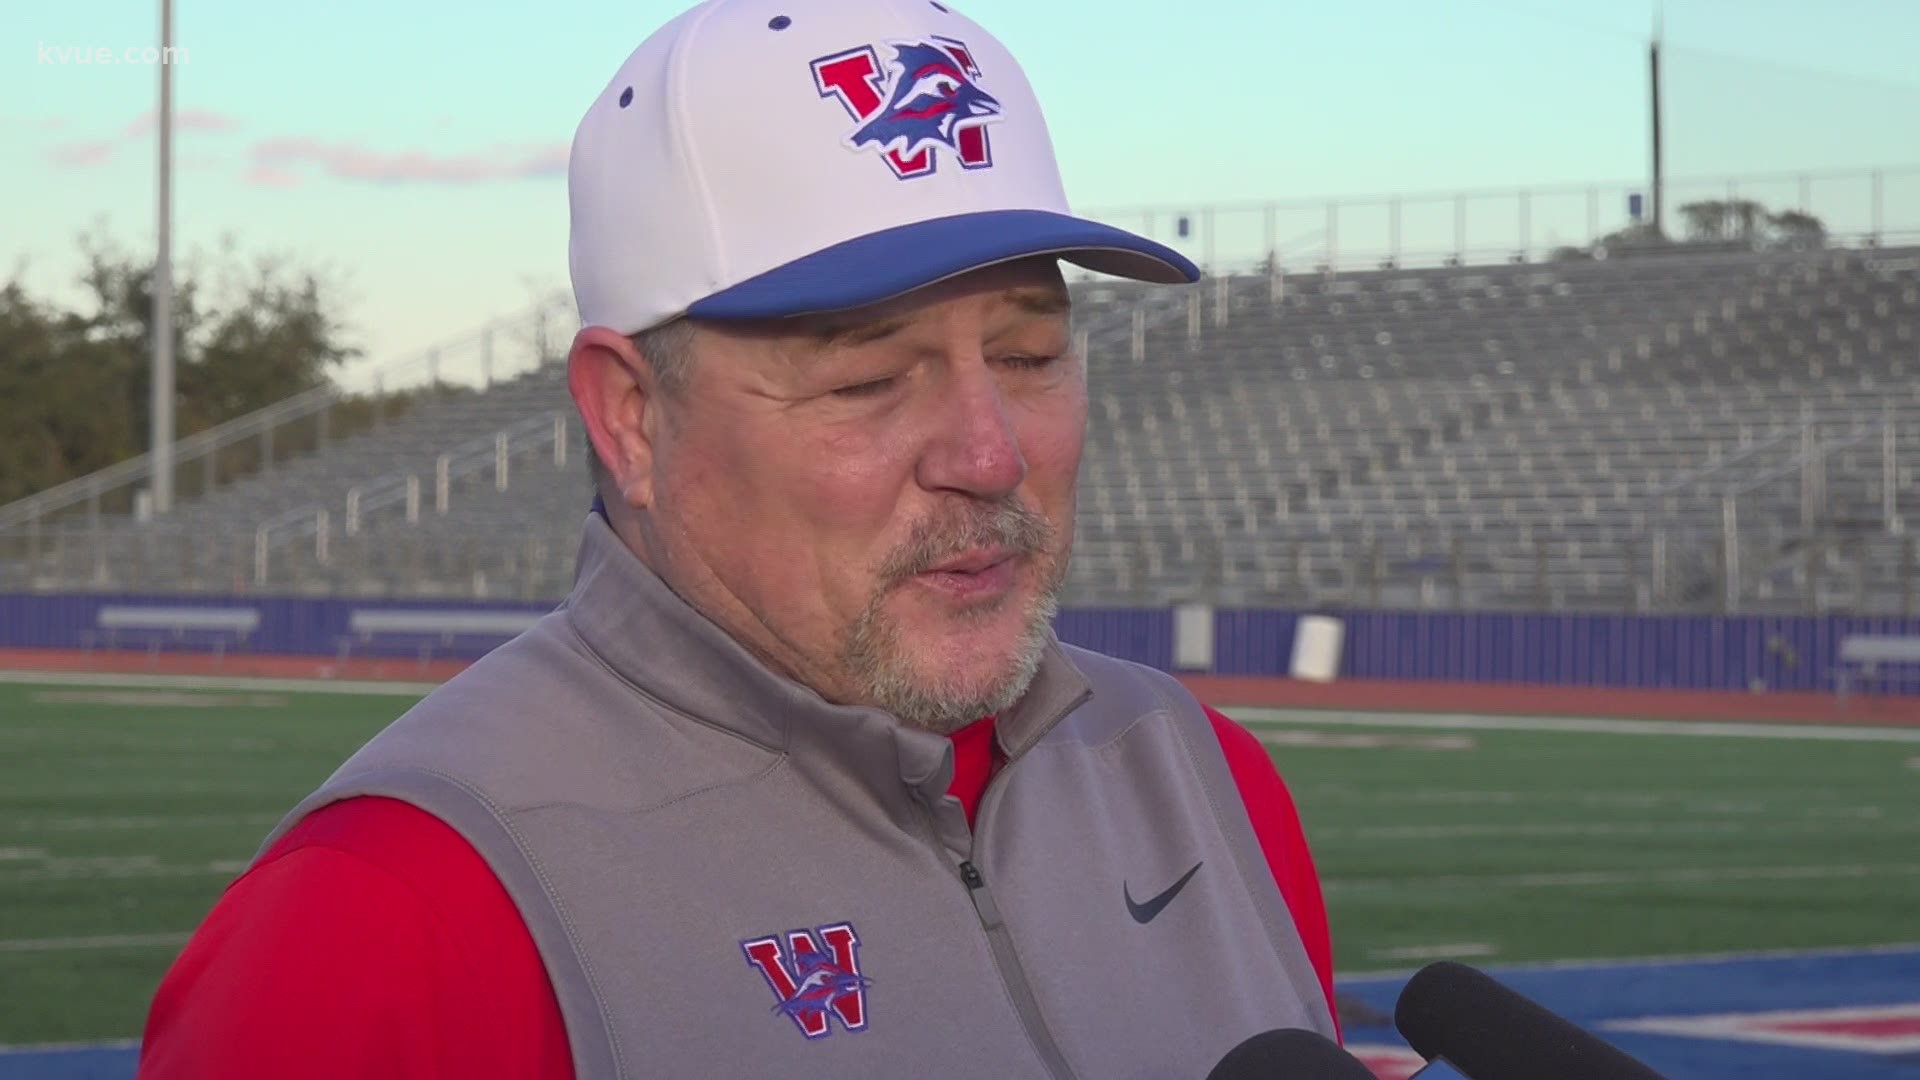 Westlake is heading back to the state championship, hoping to make history and win back-to-back state titles.